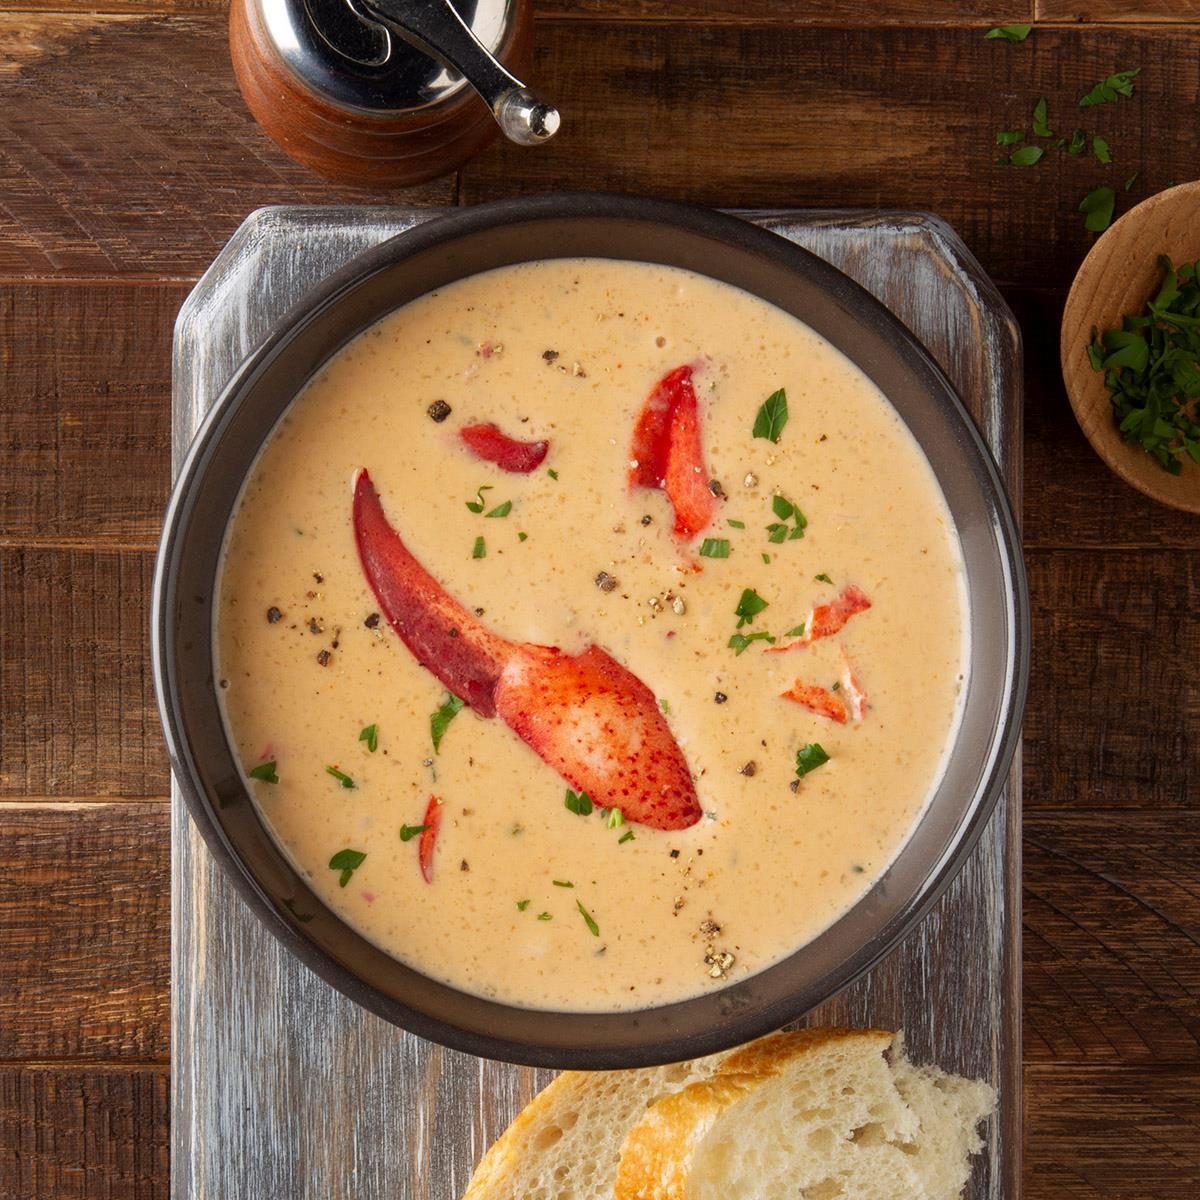 Lobster Bisque Recipe: How to Make It